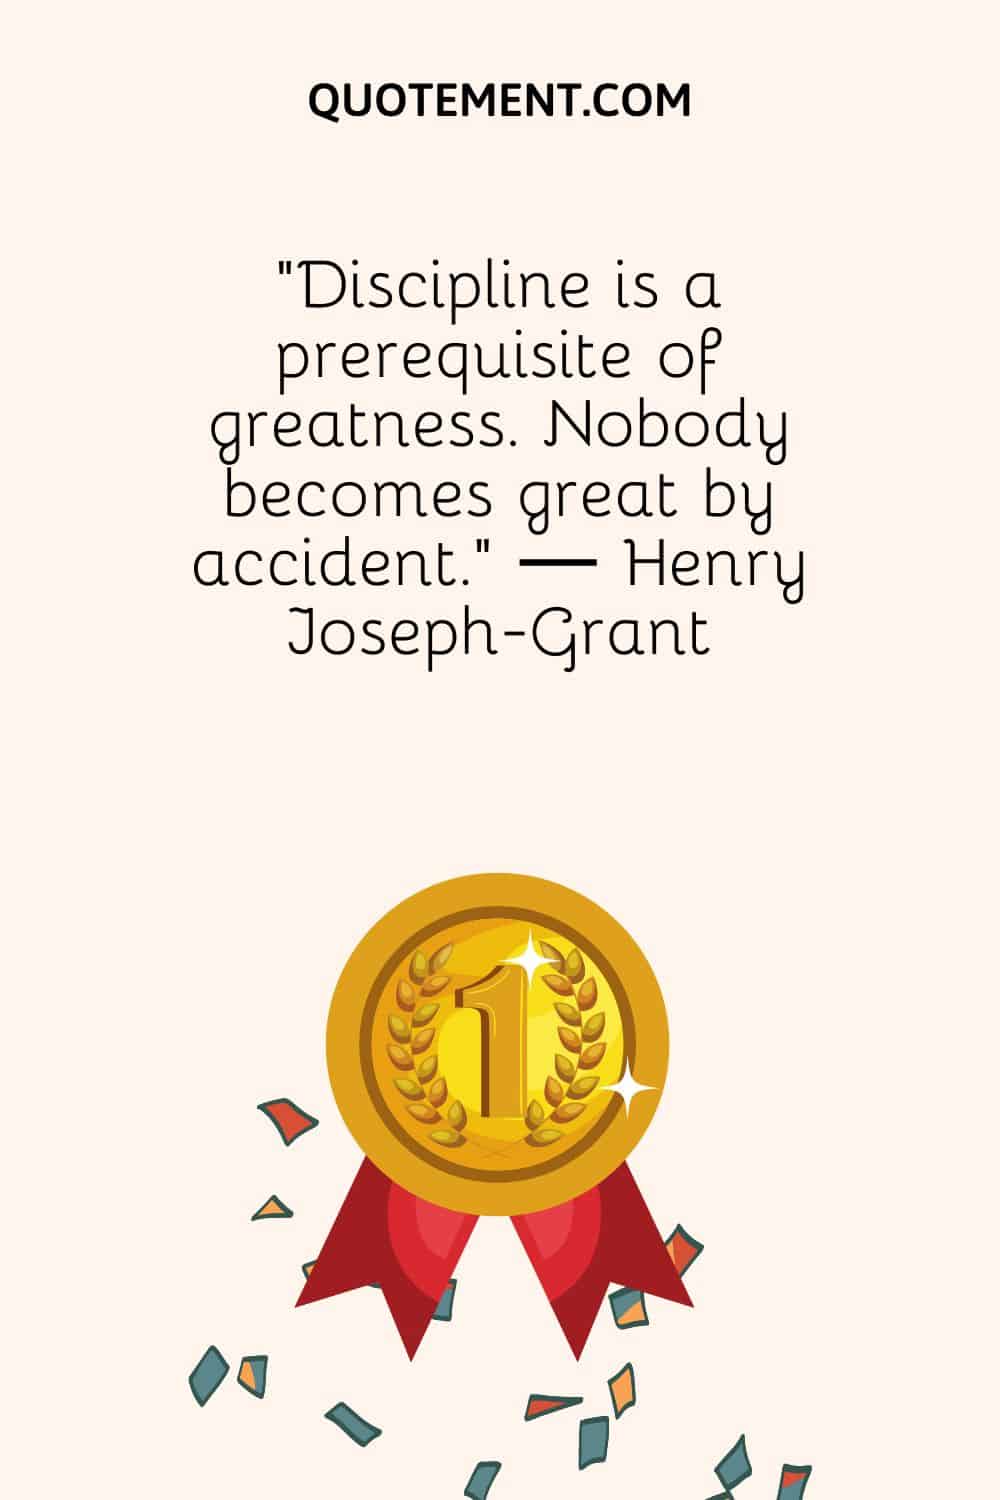 “Discipline is a prerequisite of greatness. Nobody becomes great by accident.” ― Henry Joseph-Grant